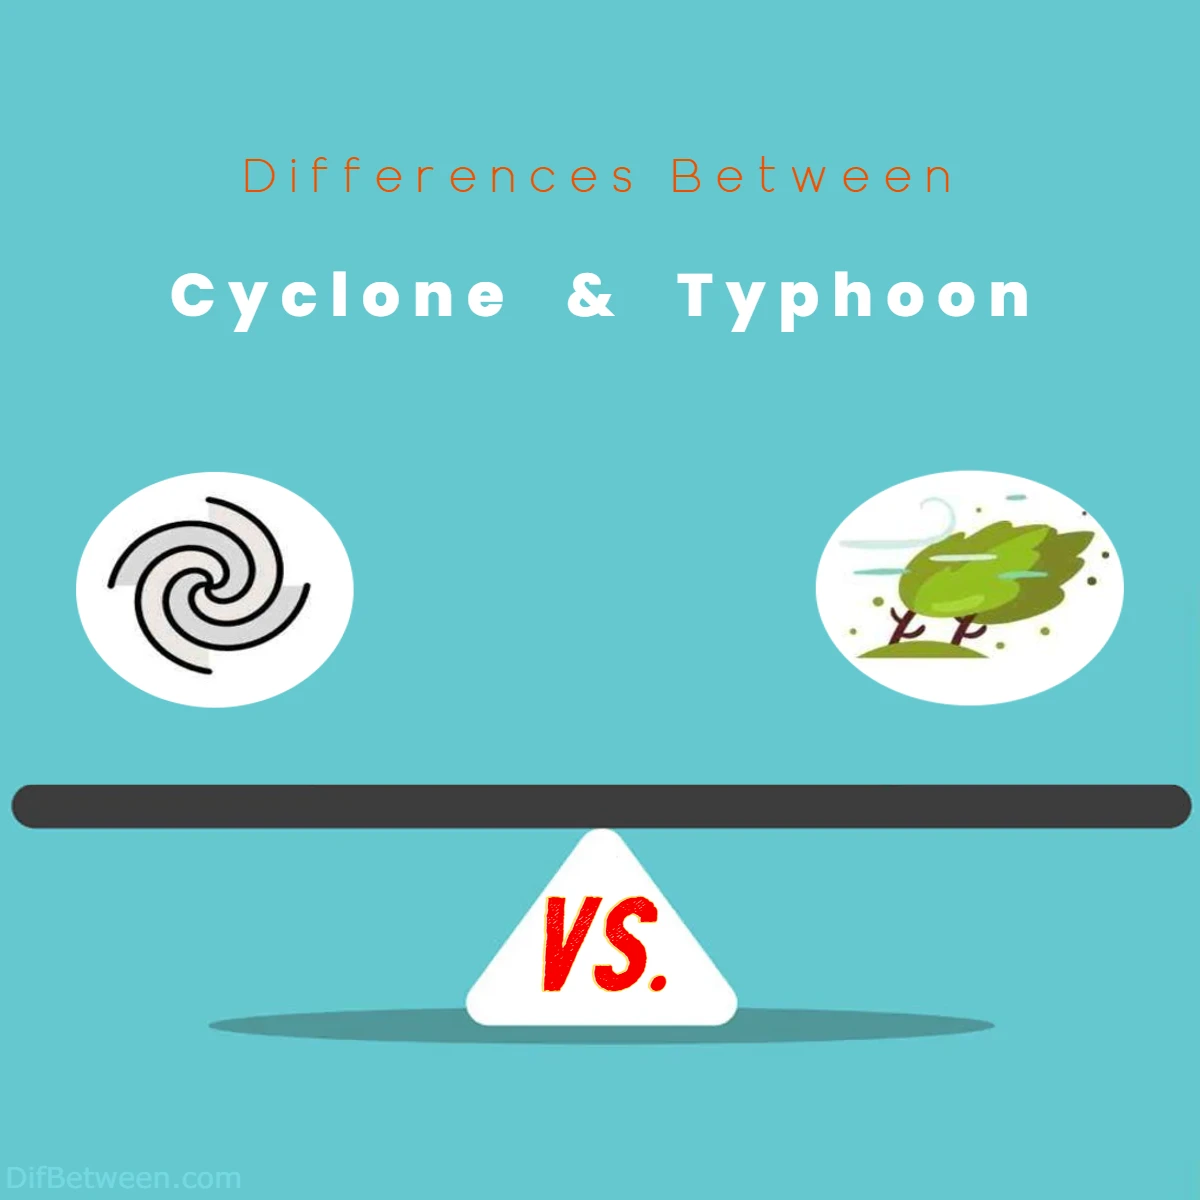 Differences Between Cyclone vs Typhoon